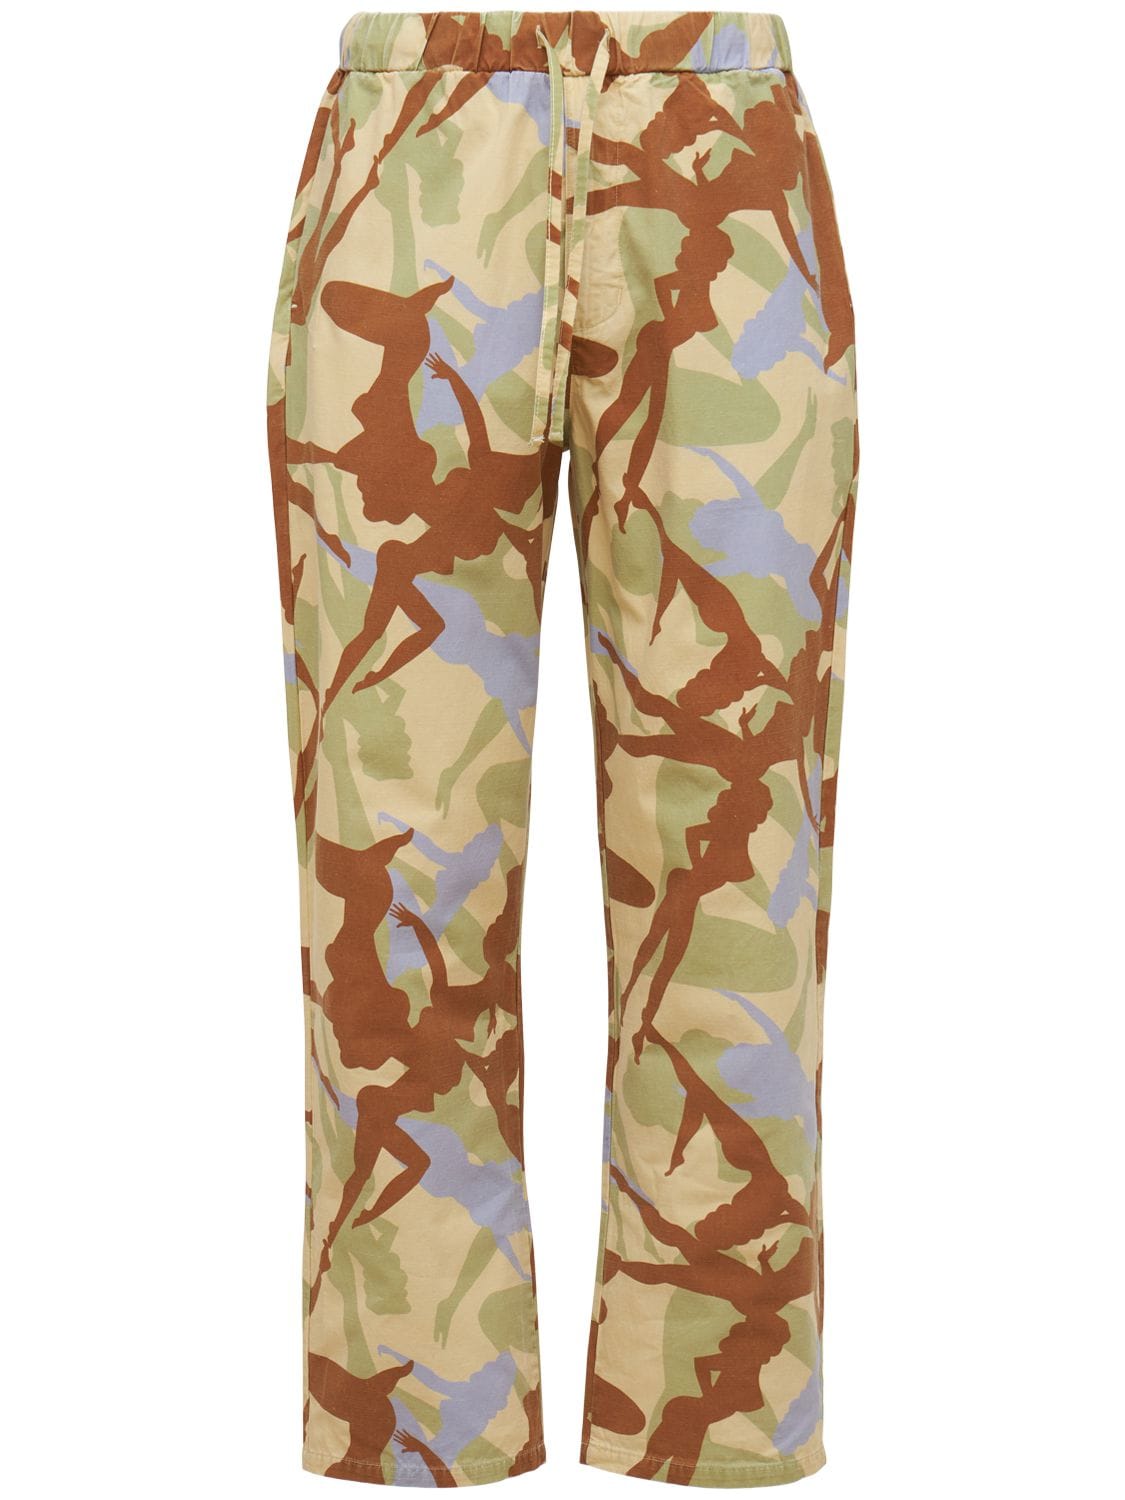 A New Brand Camo Pin Up Printed Cotton Combat Pants In 베이지,브라운